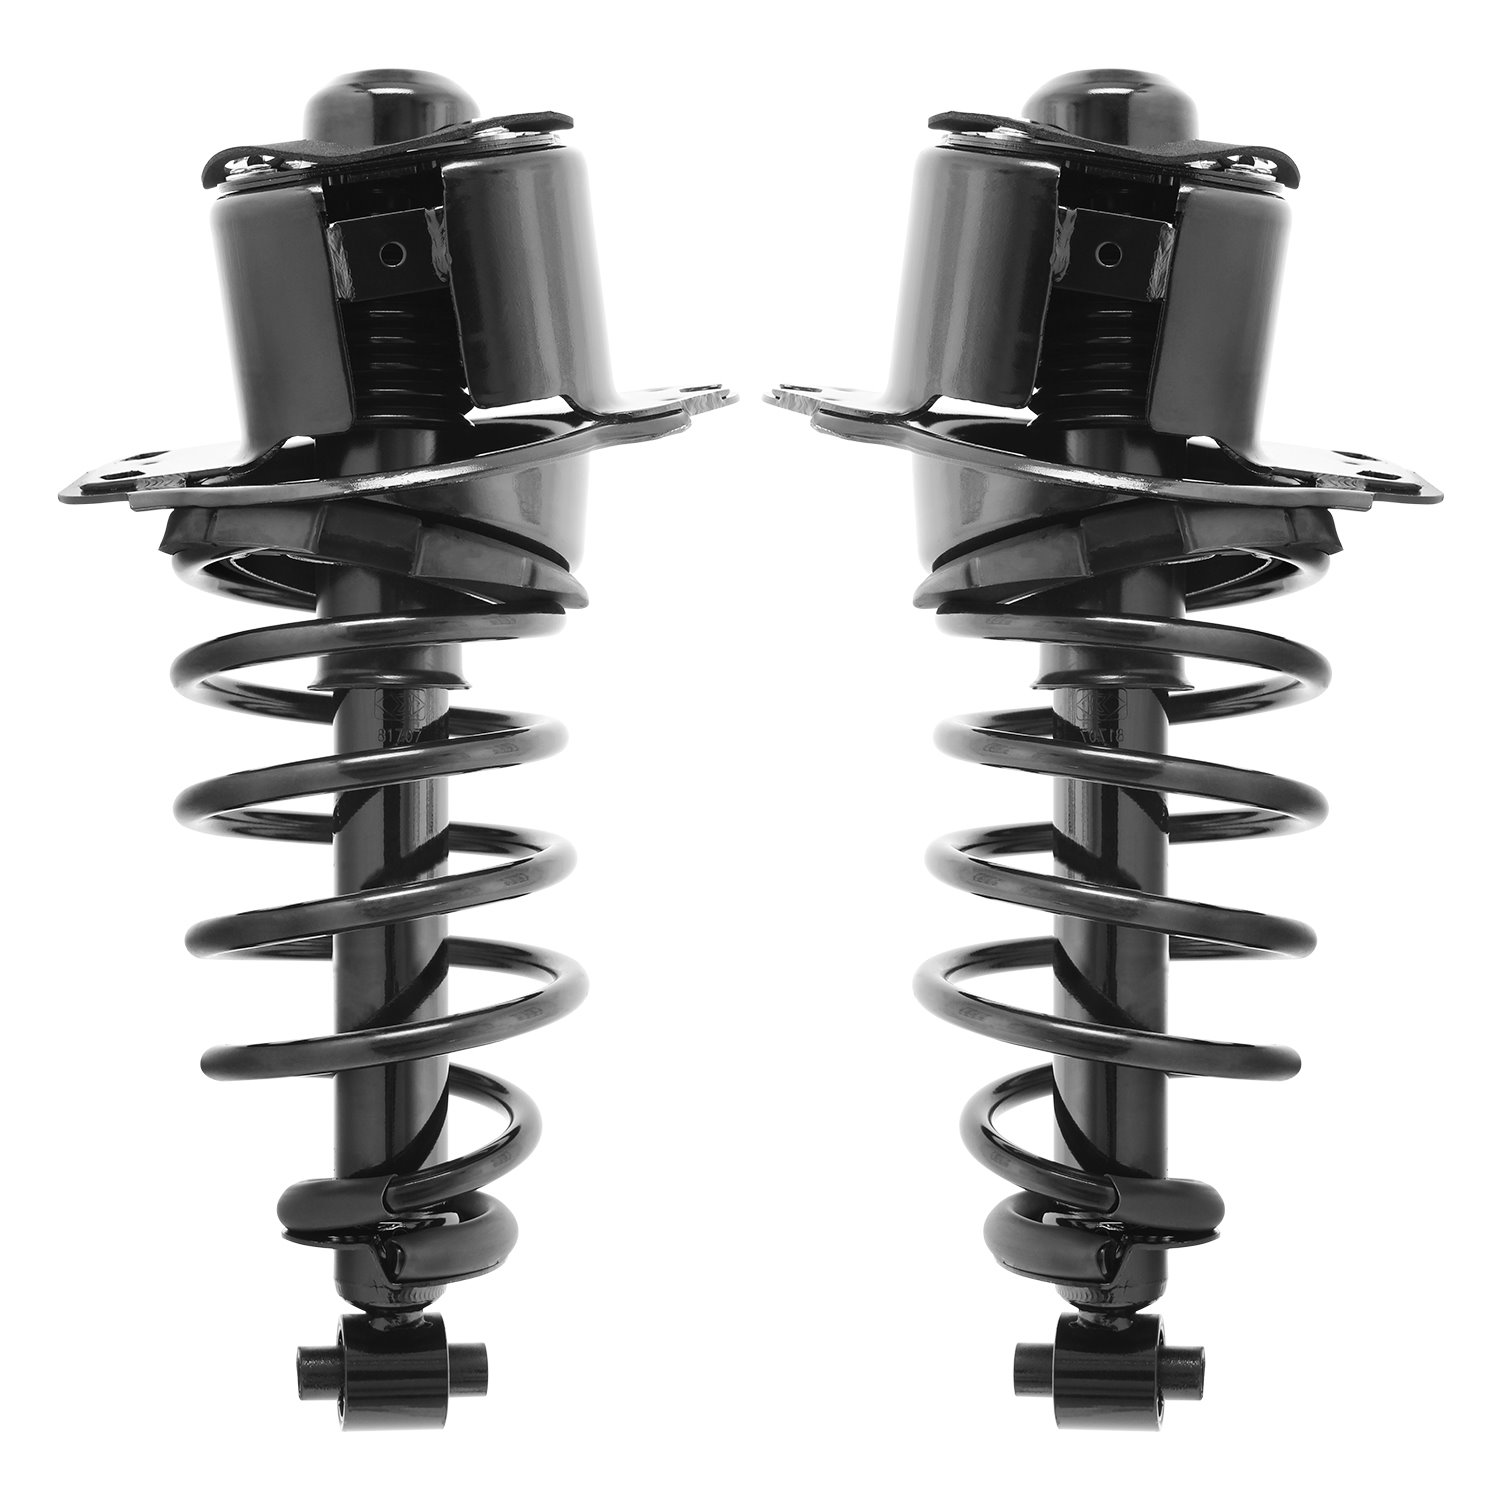 2-15041-15042-001 Suspension Strut & Coil Spring Assembly Set Fits Select Ford Taurus, Mercury Sable